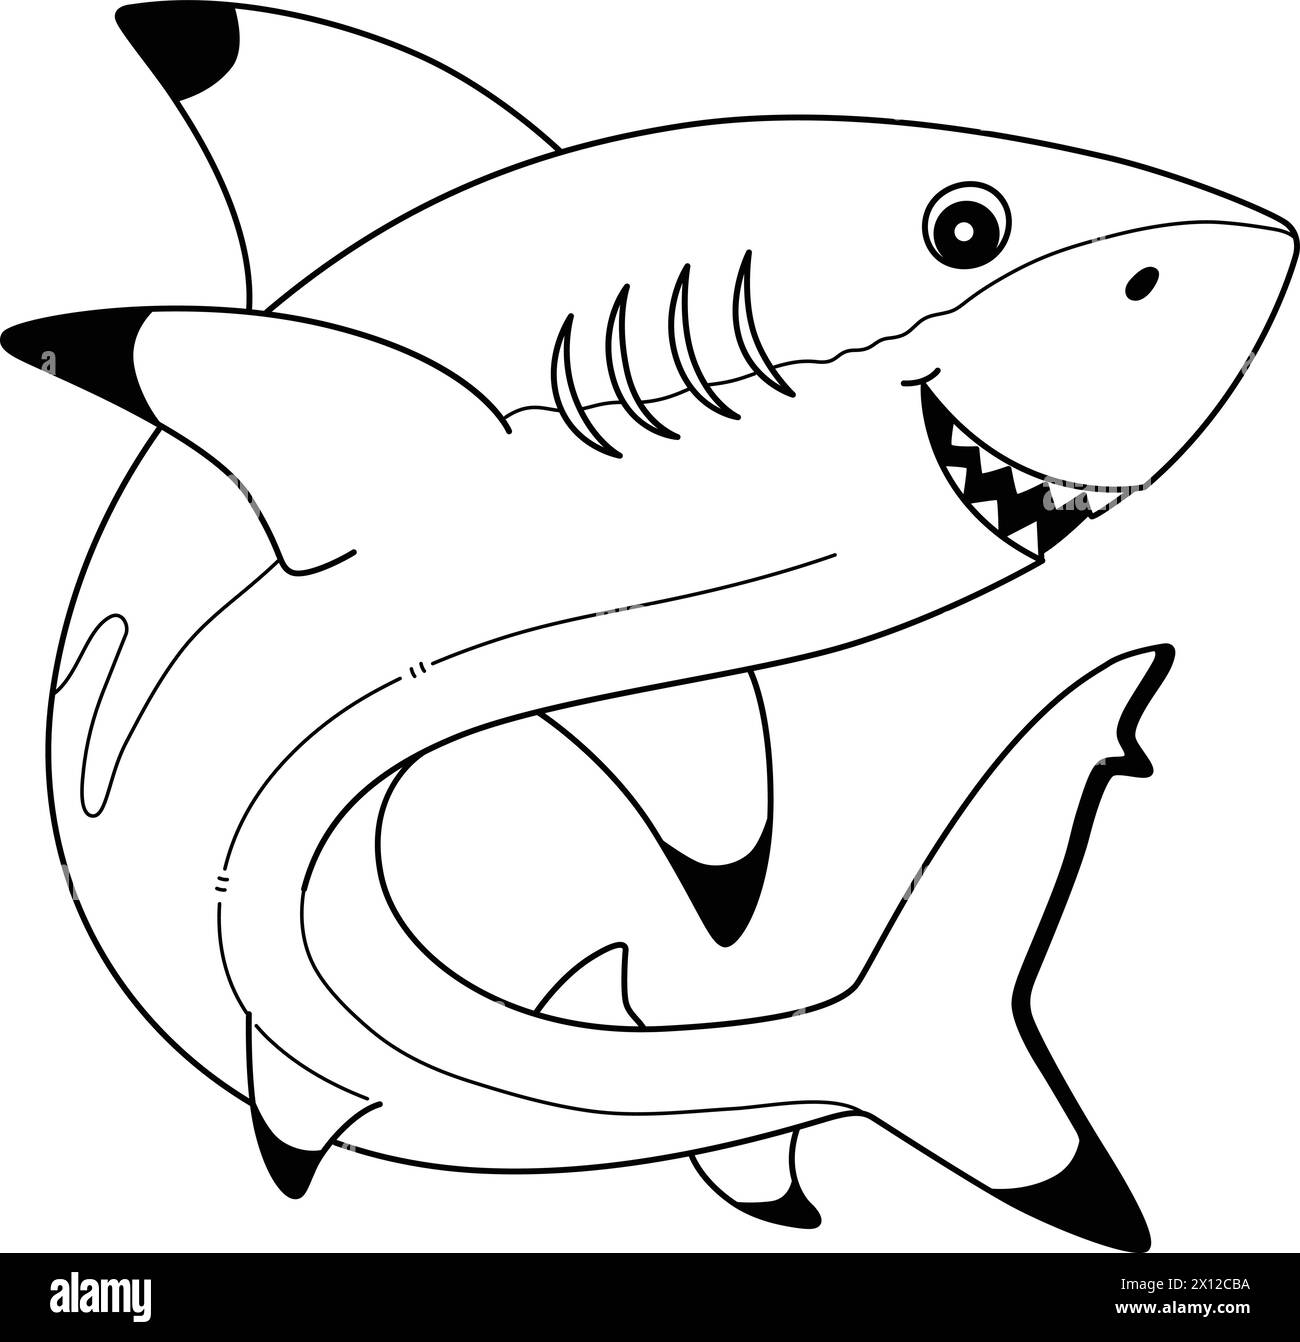 Blacktip Shark Isolated Coloring Page for Kids Stock Vector